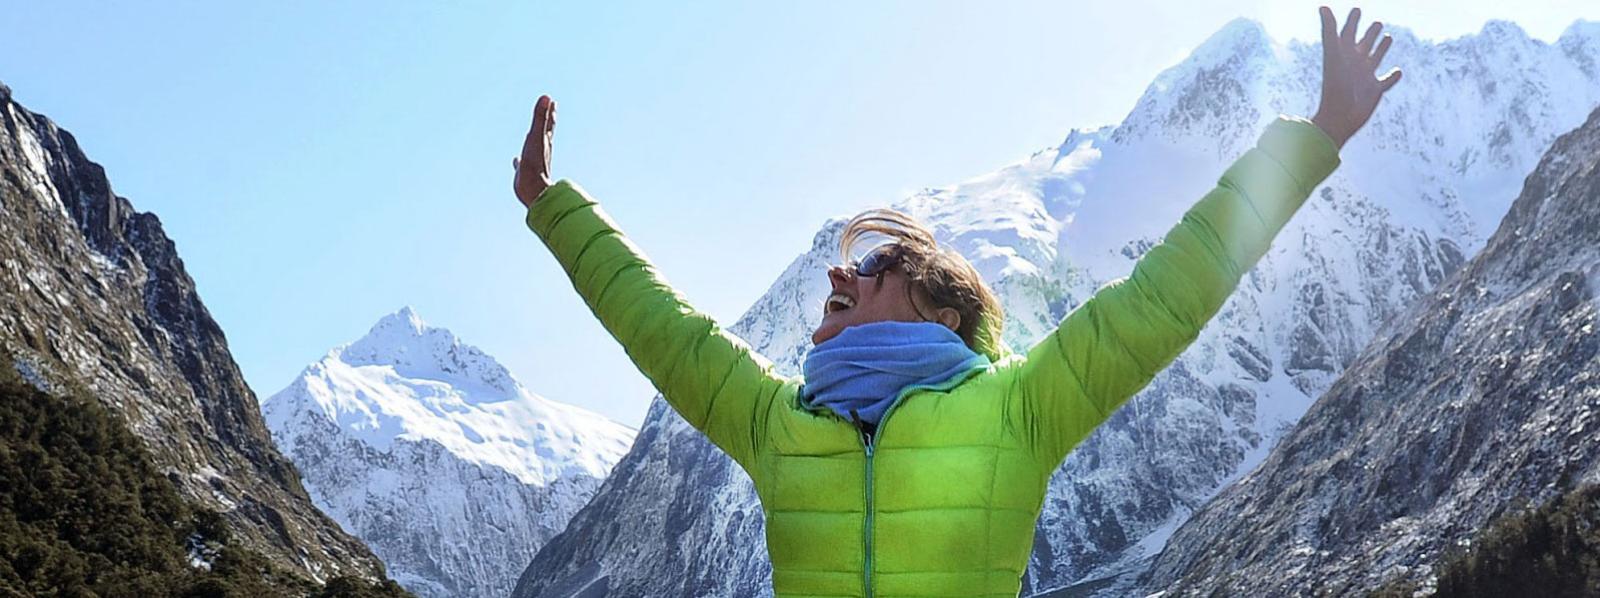 Arms in the air, rejoicing at the natural beauty among New Zealand's snow capped mountains. 